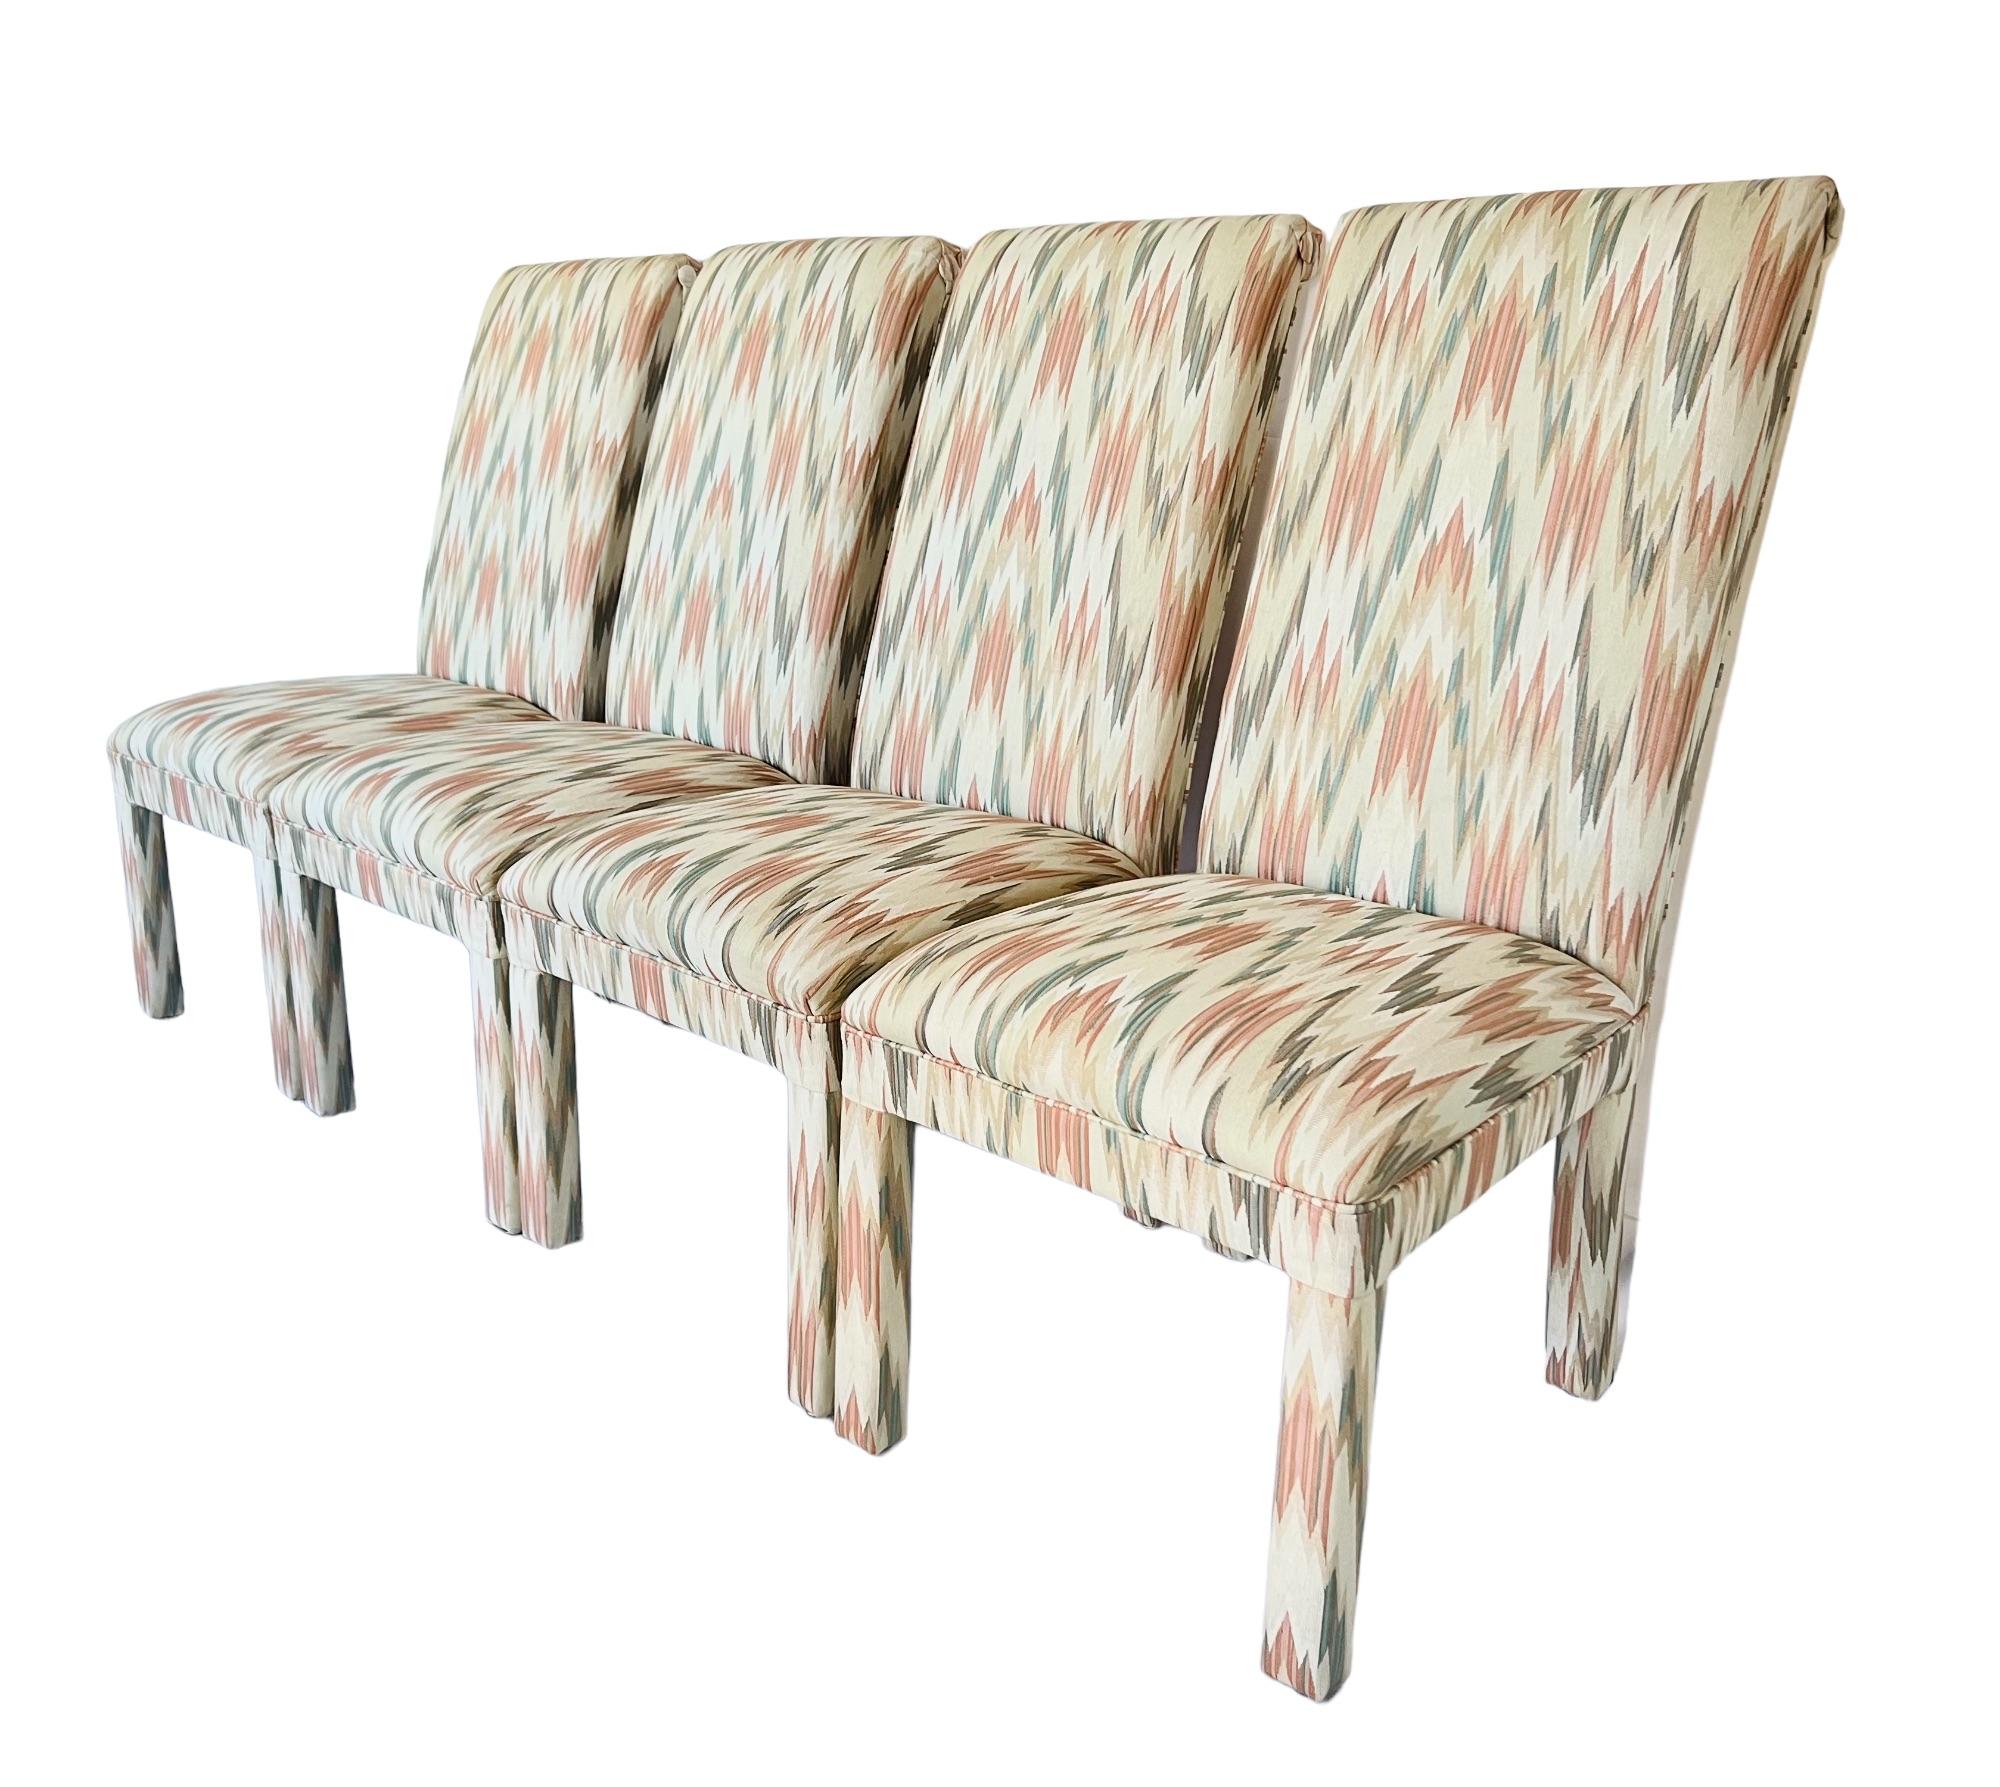 A late 20th century set of four postmodern style Parsons dining side chairs. Featuring a high back and curved scroll top with button detail. Fully upholstered in heavy woven jacquard flamestitch fabric in shades of soft pink, teal, beige &